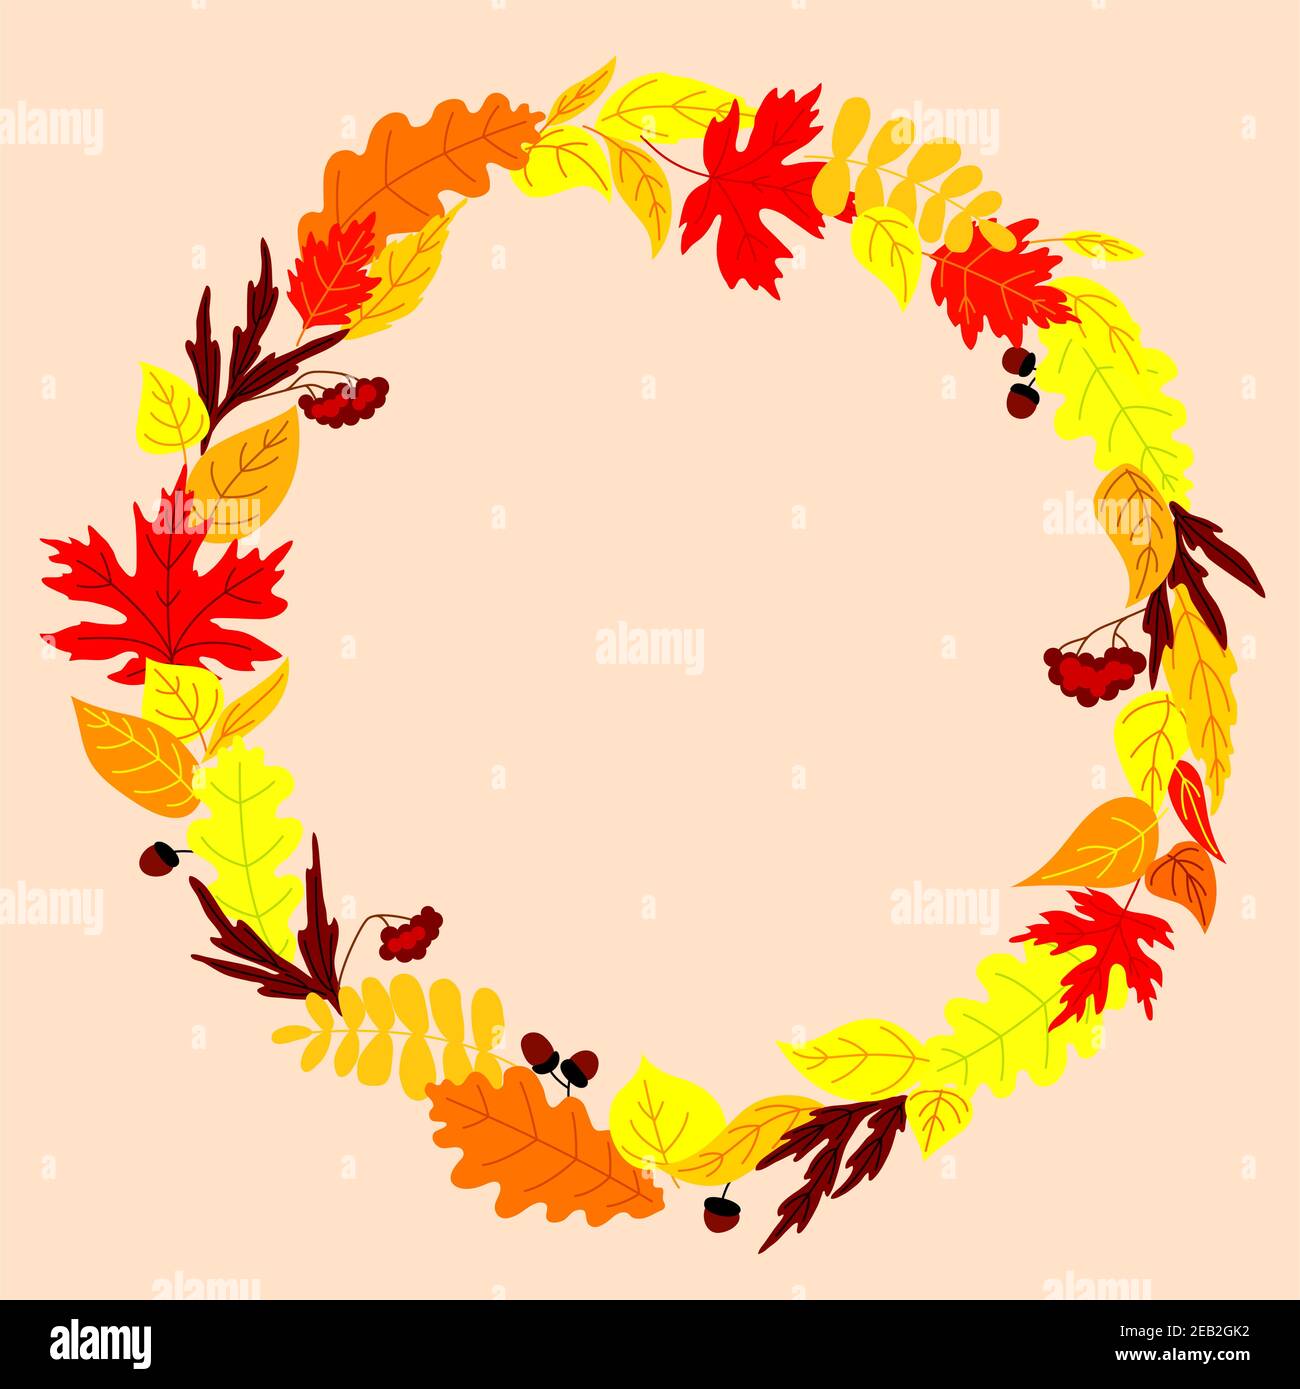 Colorful autumn falling leaves arranged in round shaped frame, decorated by acorns and bunches of viburnum Stock Vector